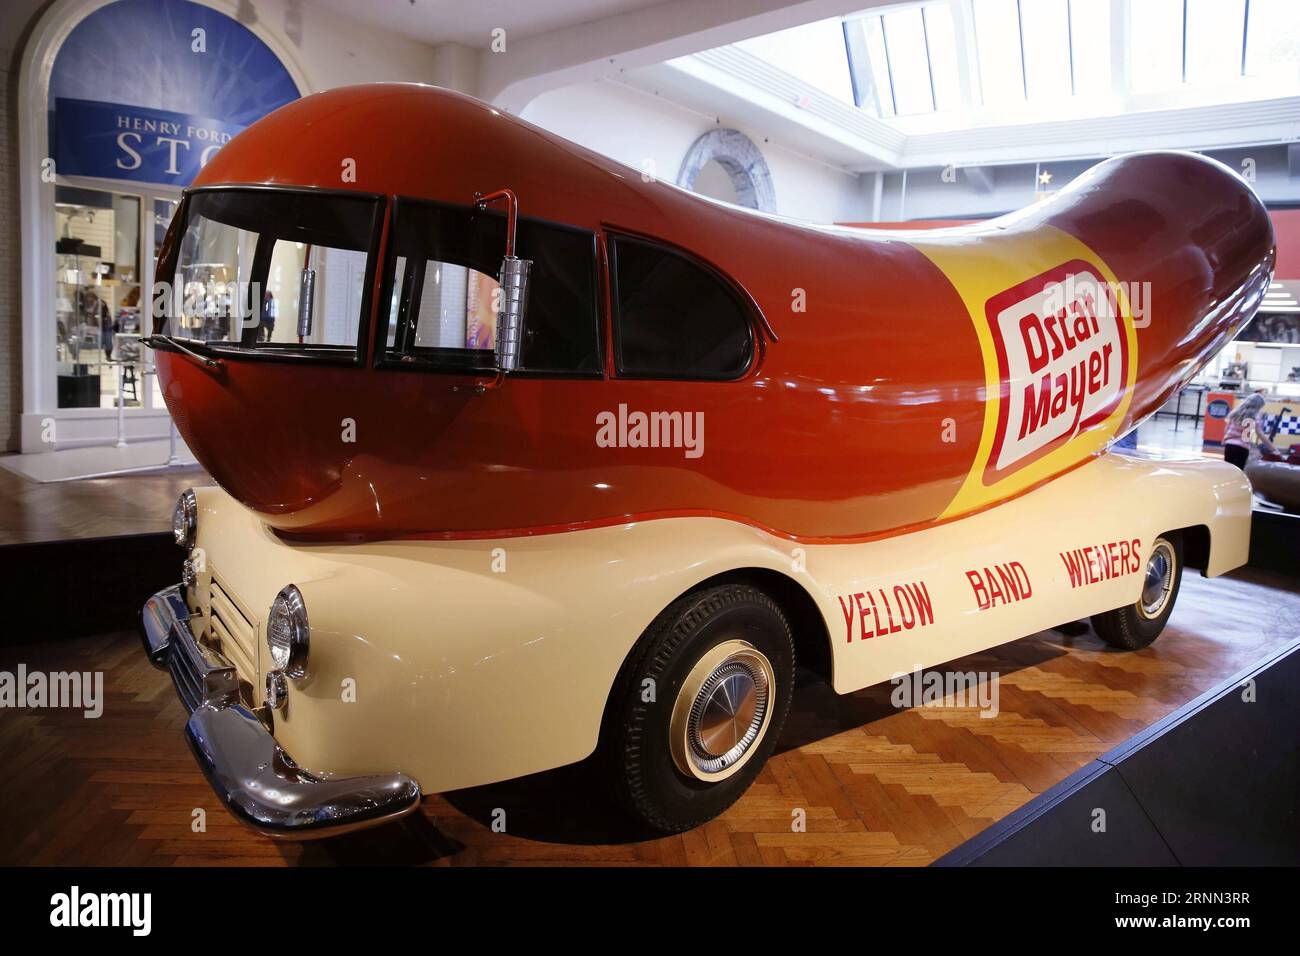 (170623) -- DETROIT, June 23, 2017 -- Photo taken on June 22, 2017 shows a 1952 wienermobile displayed at the Henry Ford Museum of American Innovation, in Detroit, the United States. Wang Ping) (dtf) U.S.-DETROIT-HENRY FORD MUSEUM wangping PUBLICATIONxNOTxINxCHN   Detroit June 23 2017 Photo Taken ON June 22 2017 Shows a 1952 Wiener Mobile displayed AT The Henry Ford Museum of American Innovation in Detroit The United States Wang Ping dtf U S Detroit Henry Ford Museum Wangping PUBLICATIONxNOTxINxCHN Stock Photo